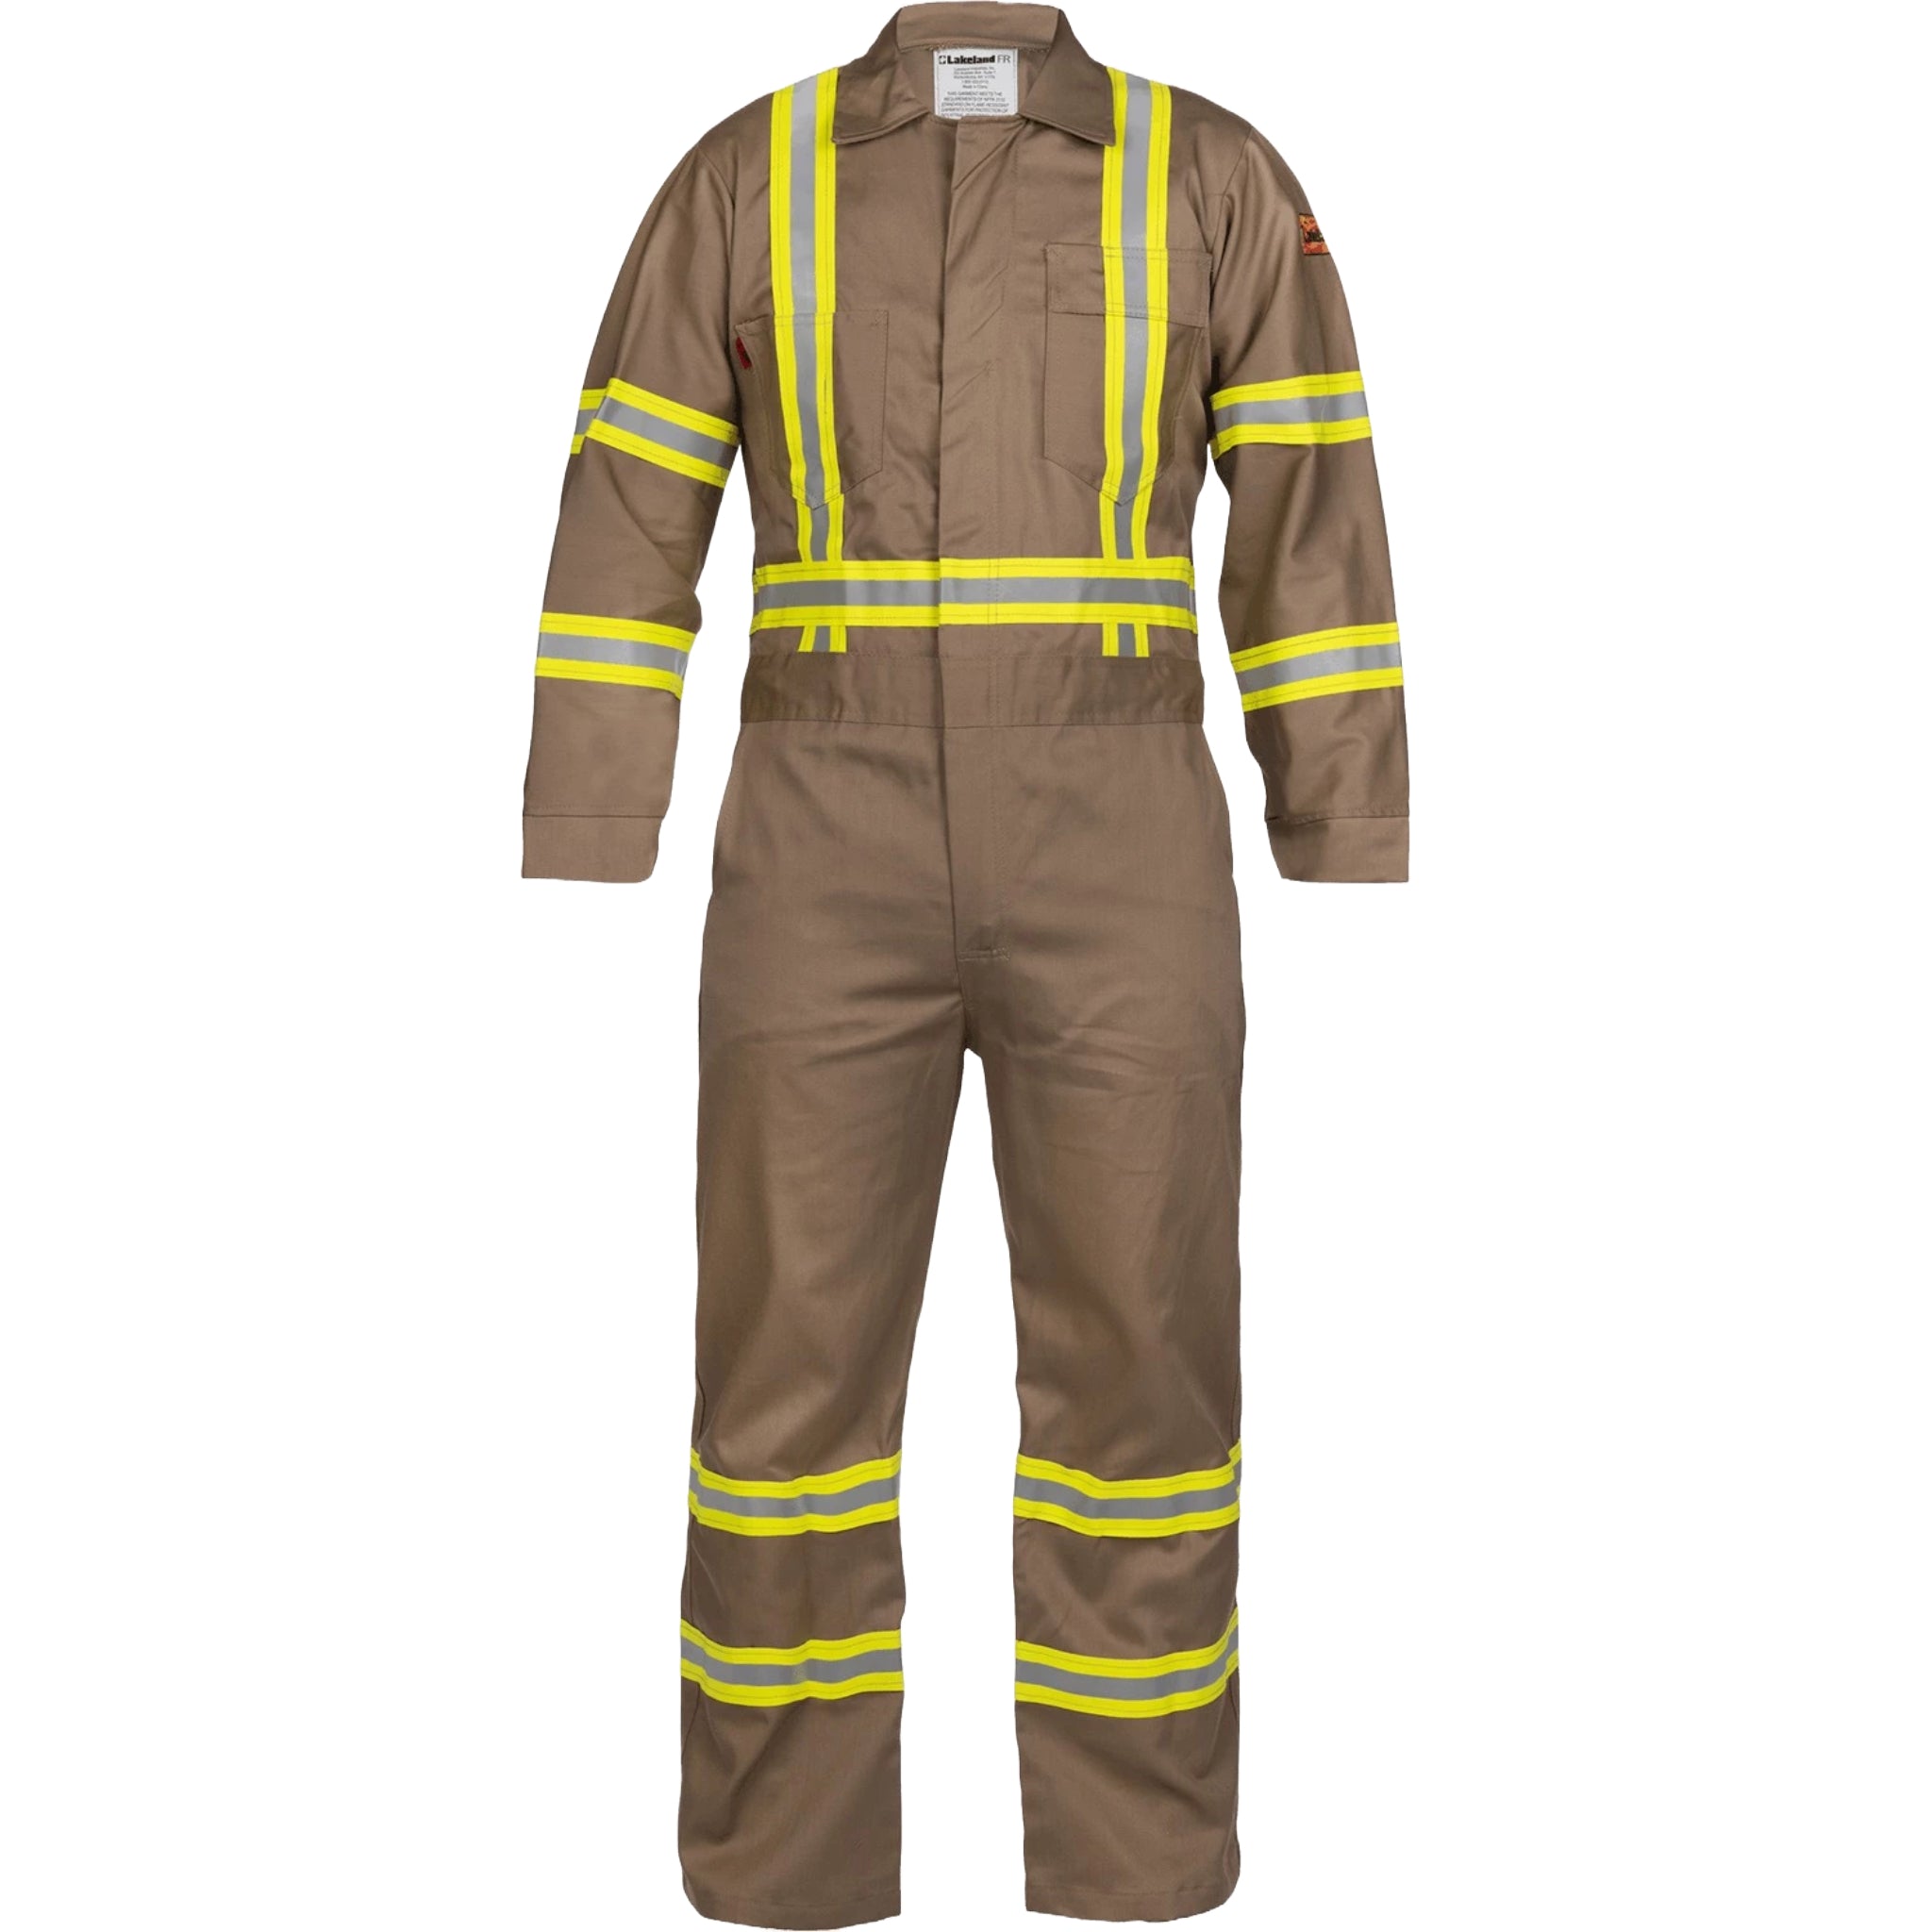 LAKELAND C071RT20 FR Coverall, 88/12 7 oz. Cotton, Tan with Reflective, 1 Each